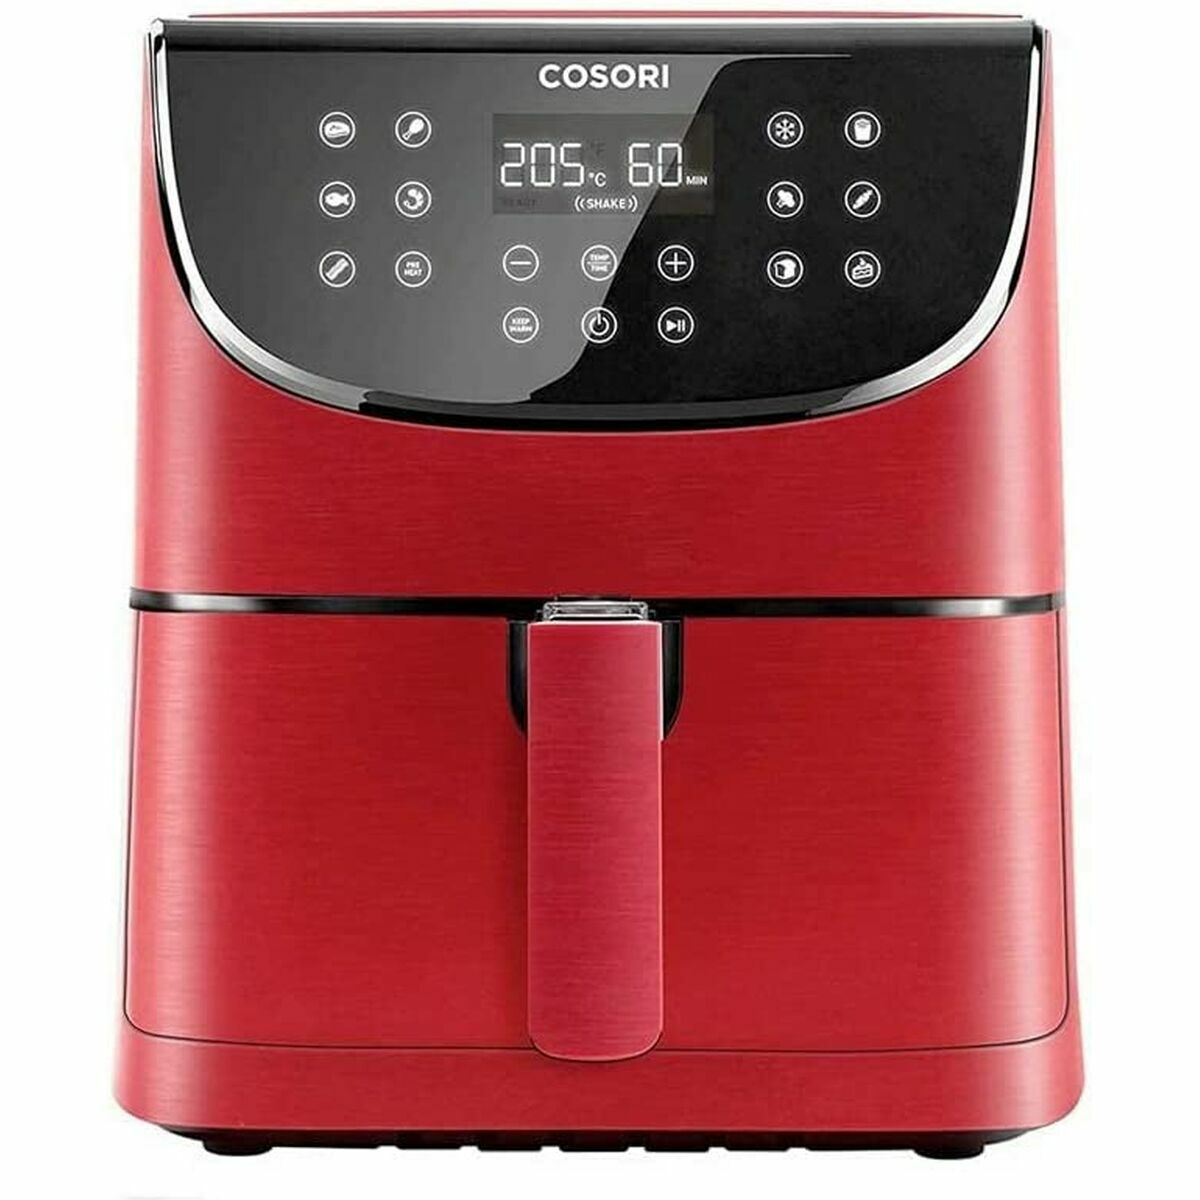 Luchtfriteuse Cosori PREMIUM CHEF RO Rood 1700 W 5,5 L